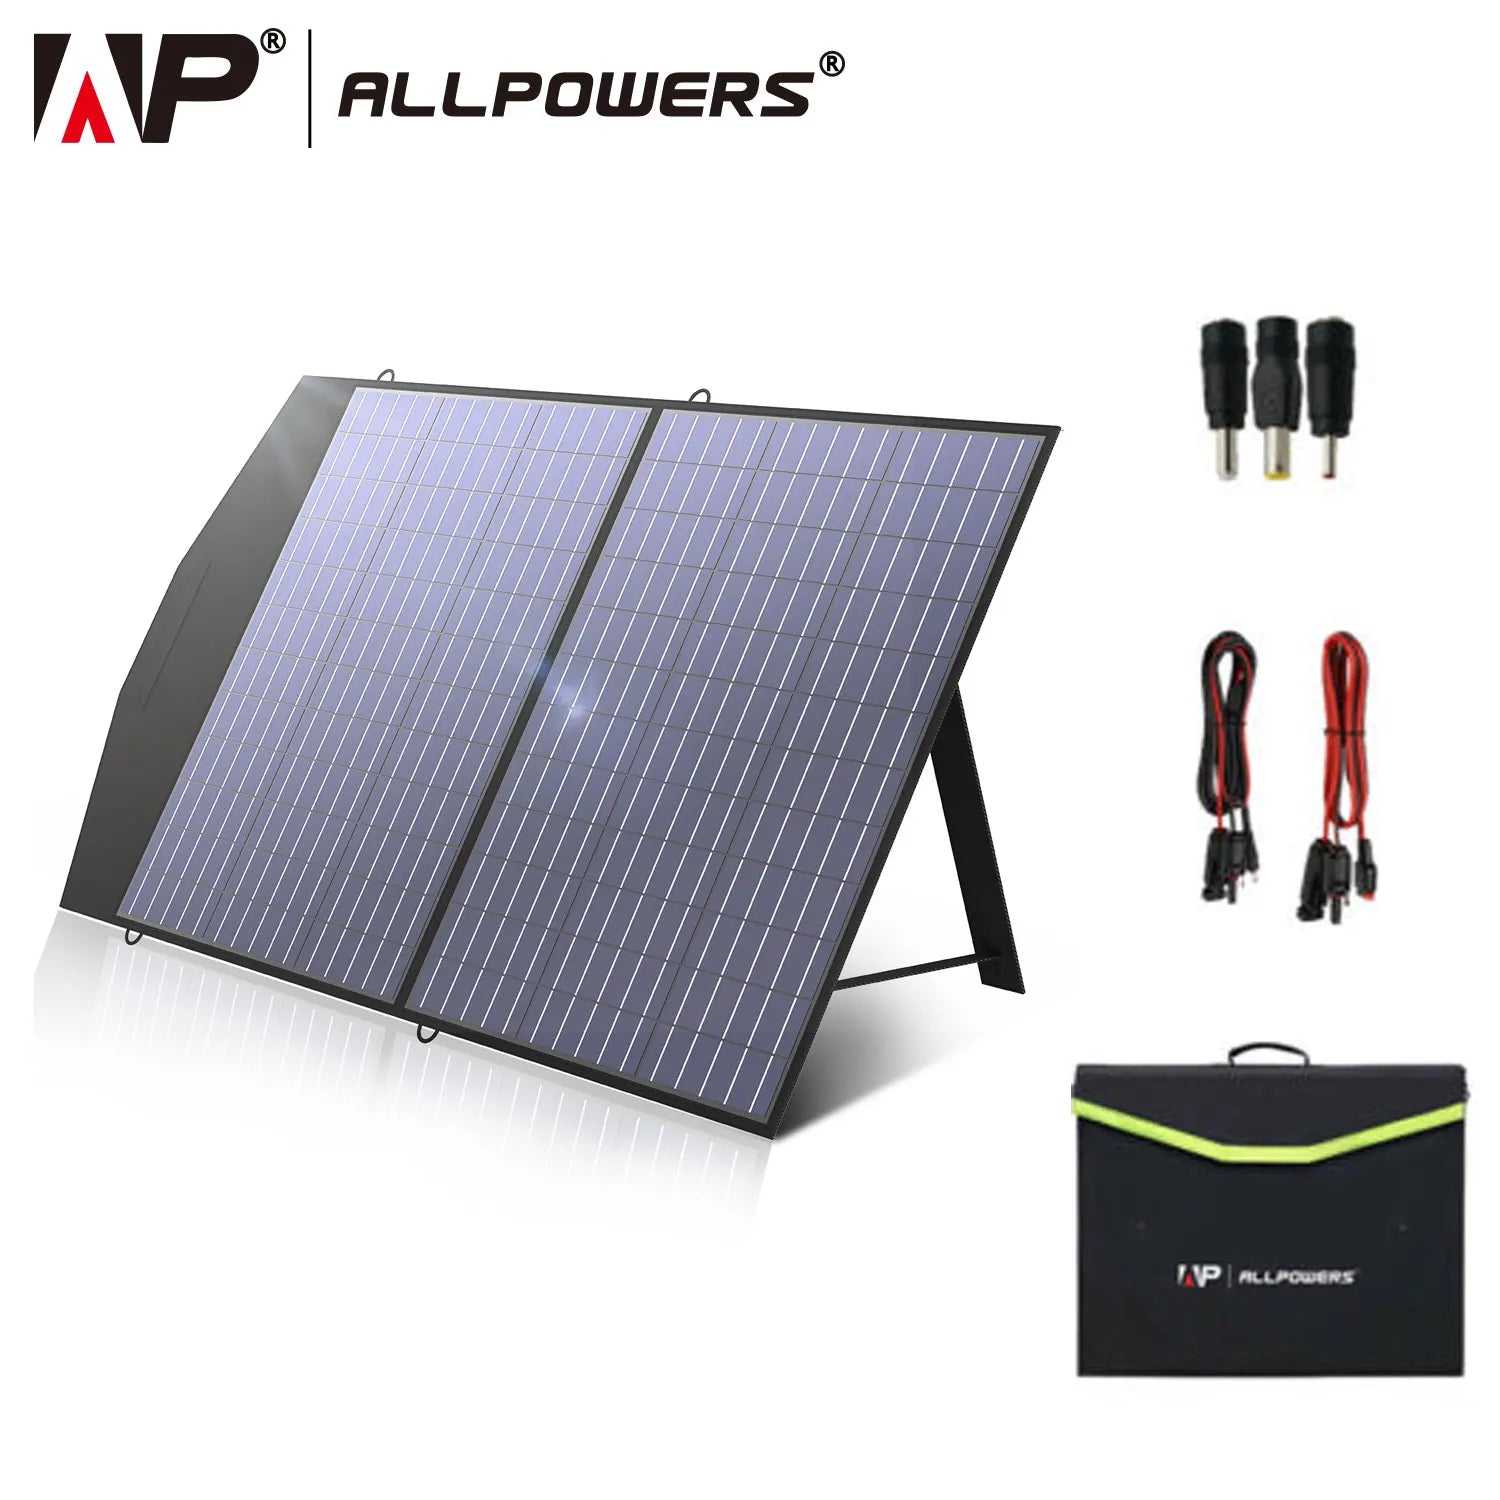 ALLPOWERS Foldable Solar Panel, Foldable solar panel charger with multiple power options for charging devices and power stations.